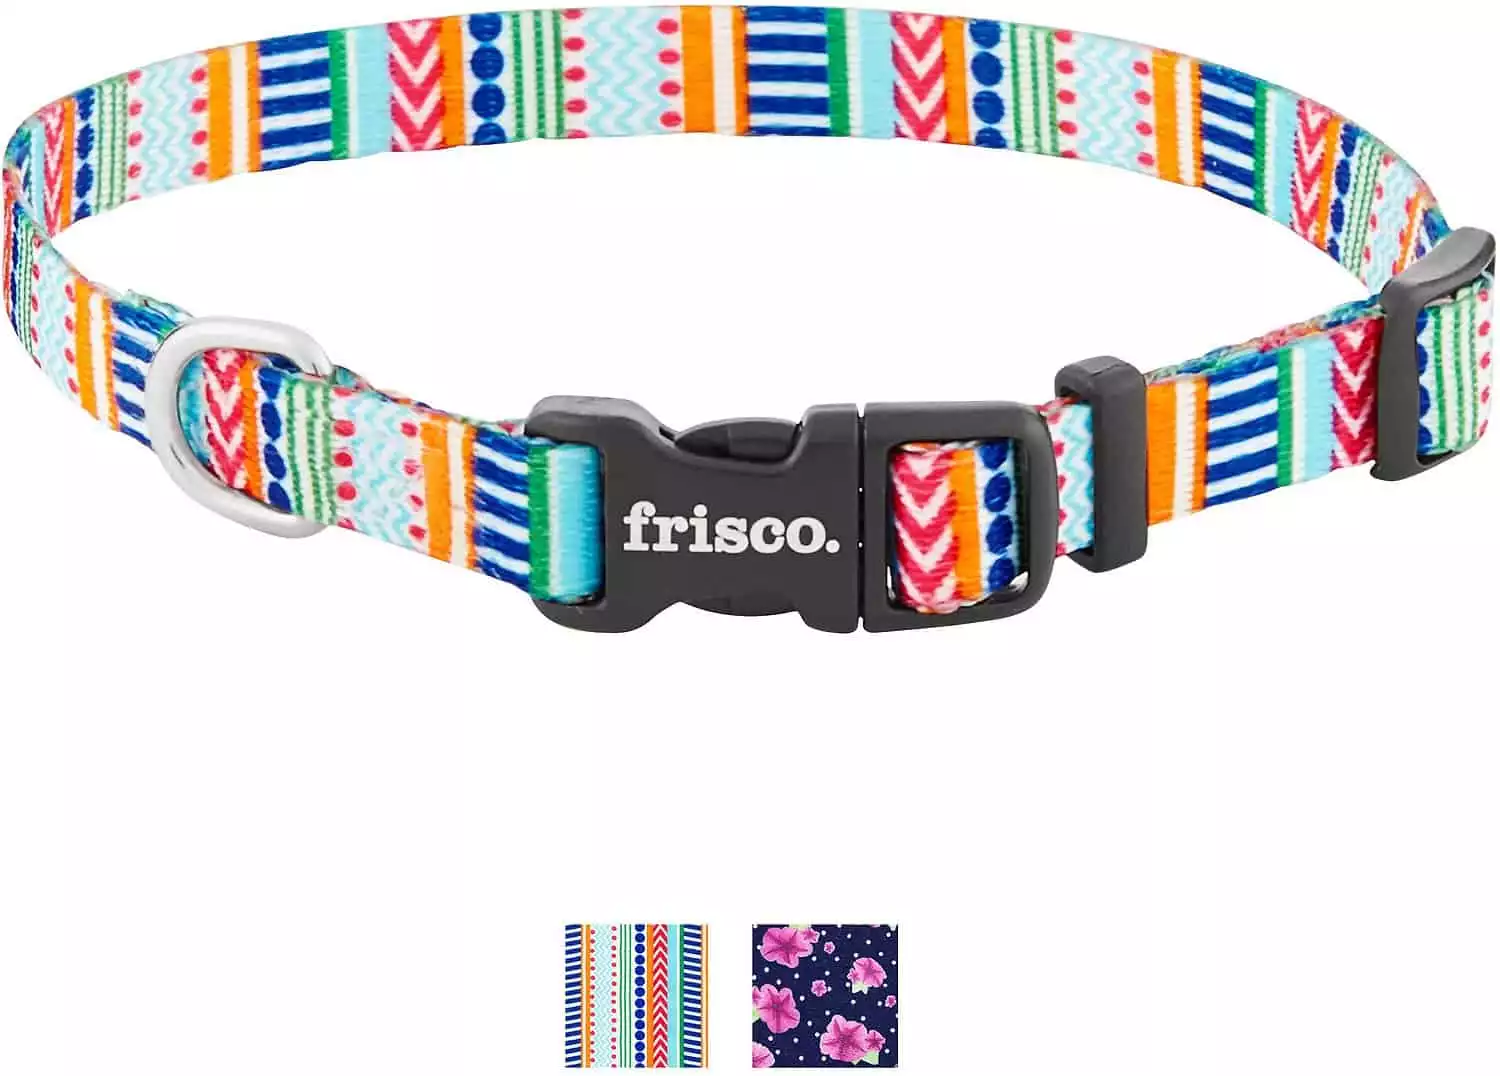 Frisco Patterned Polyester Collar